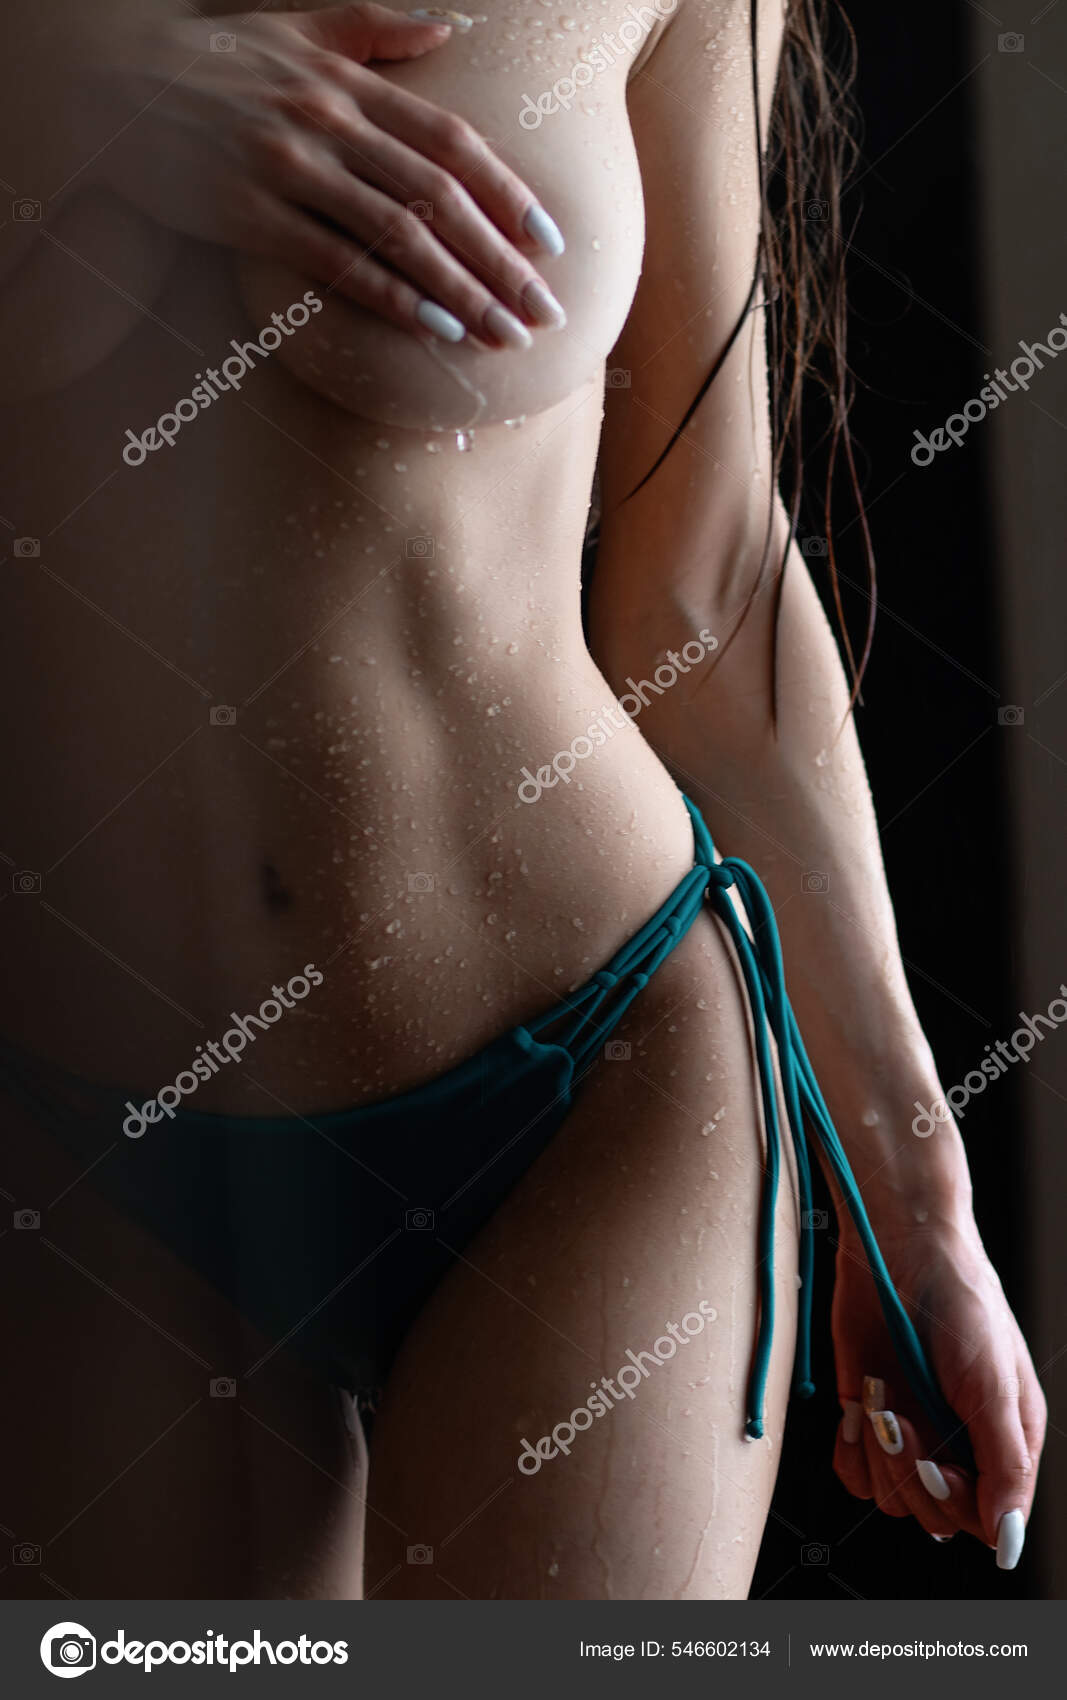 Crop Anonymous Slim Topless Female Wet Body Long Hair Covering Stock Photo by ©3kstudio 546602134